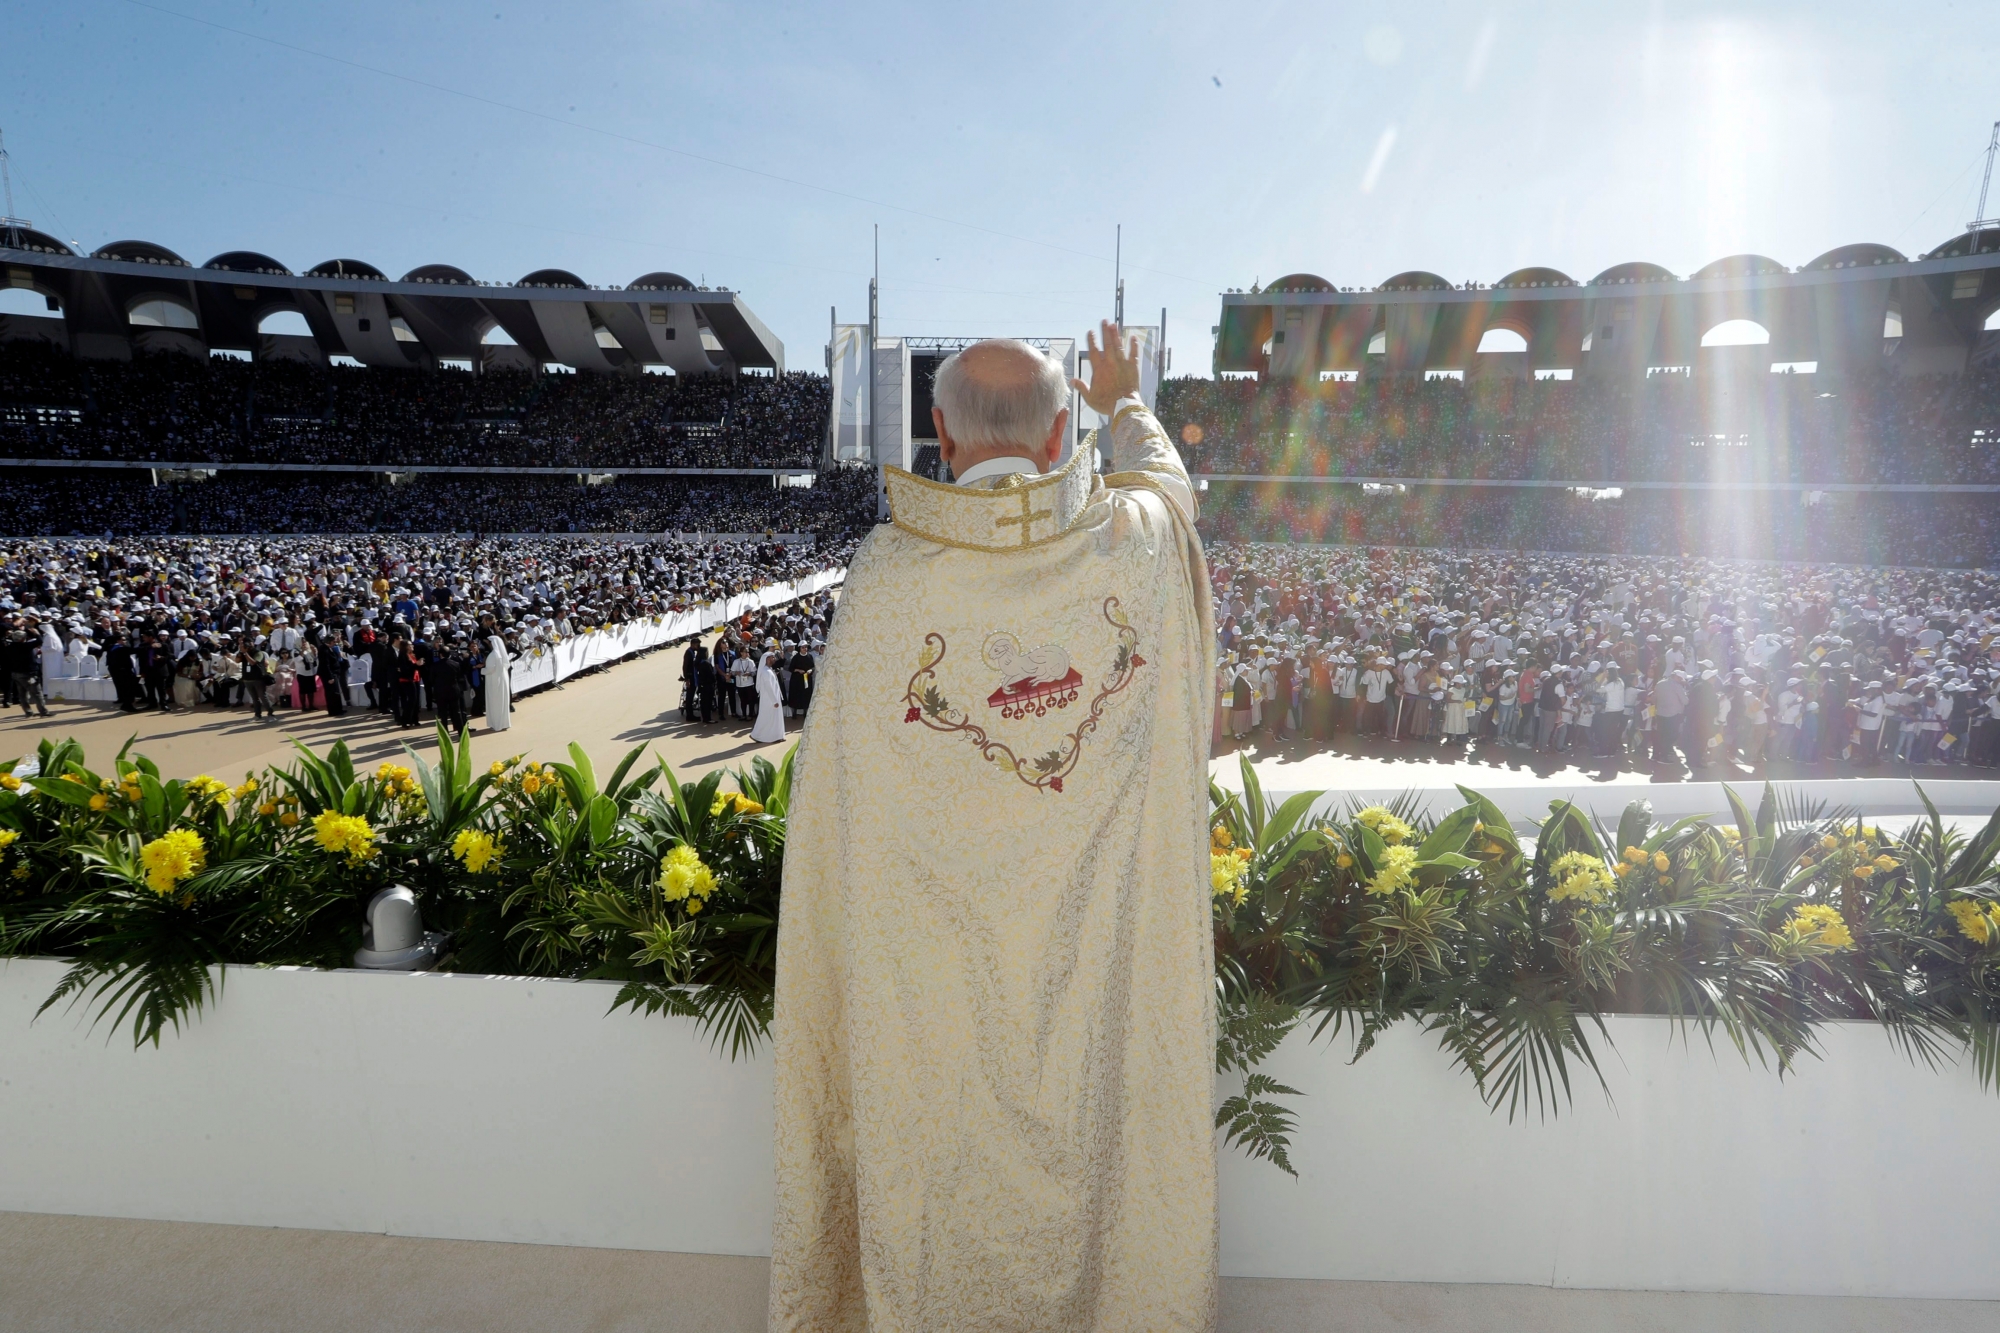 A priest waves to the crowd as he waits for the arrival of Pope Francis at the Sheikh Zayed Sports City Stadium in Abu Dhabi, United Arab Emirates, Tuesday, Feb. 5, 2019. The pontiff ministered on Tuesday to the thriving Catholic community in the United Arab Emirates as he concluded his historic visit to the Arabian Peninsula with the first-ever papal Mass here. (AP Photo/Andrew Medichini) Emirates Pope